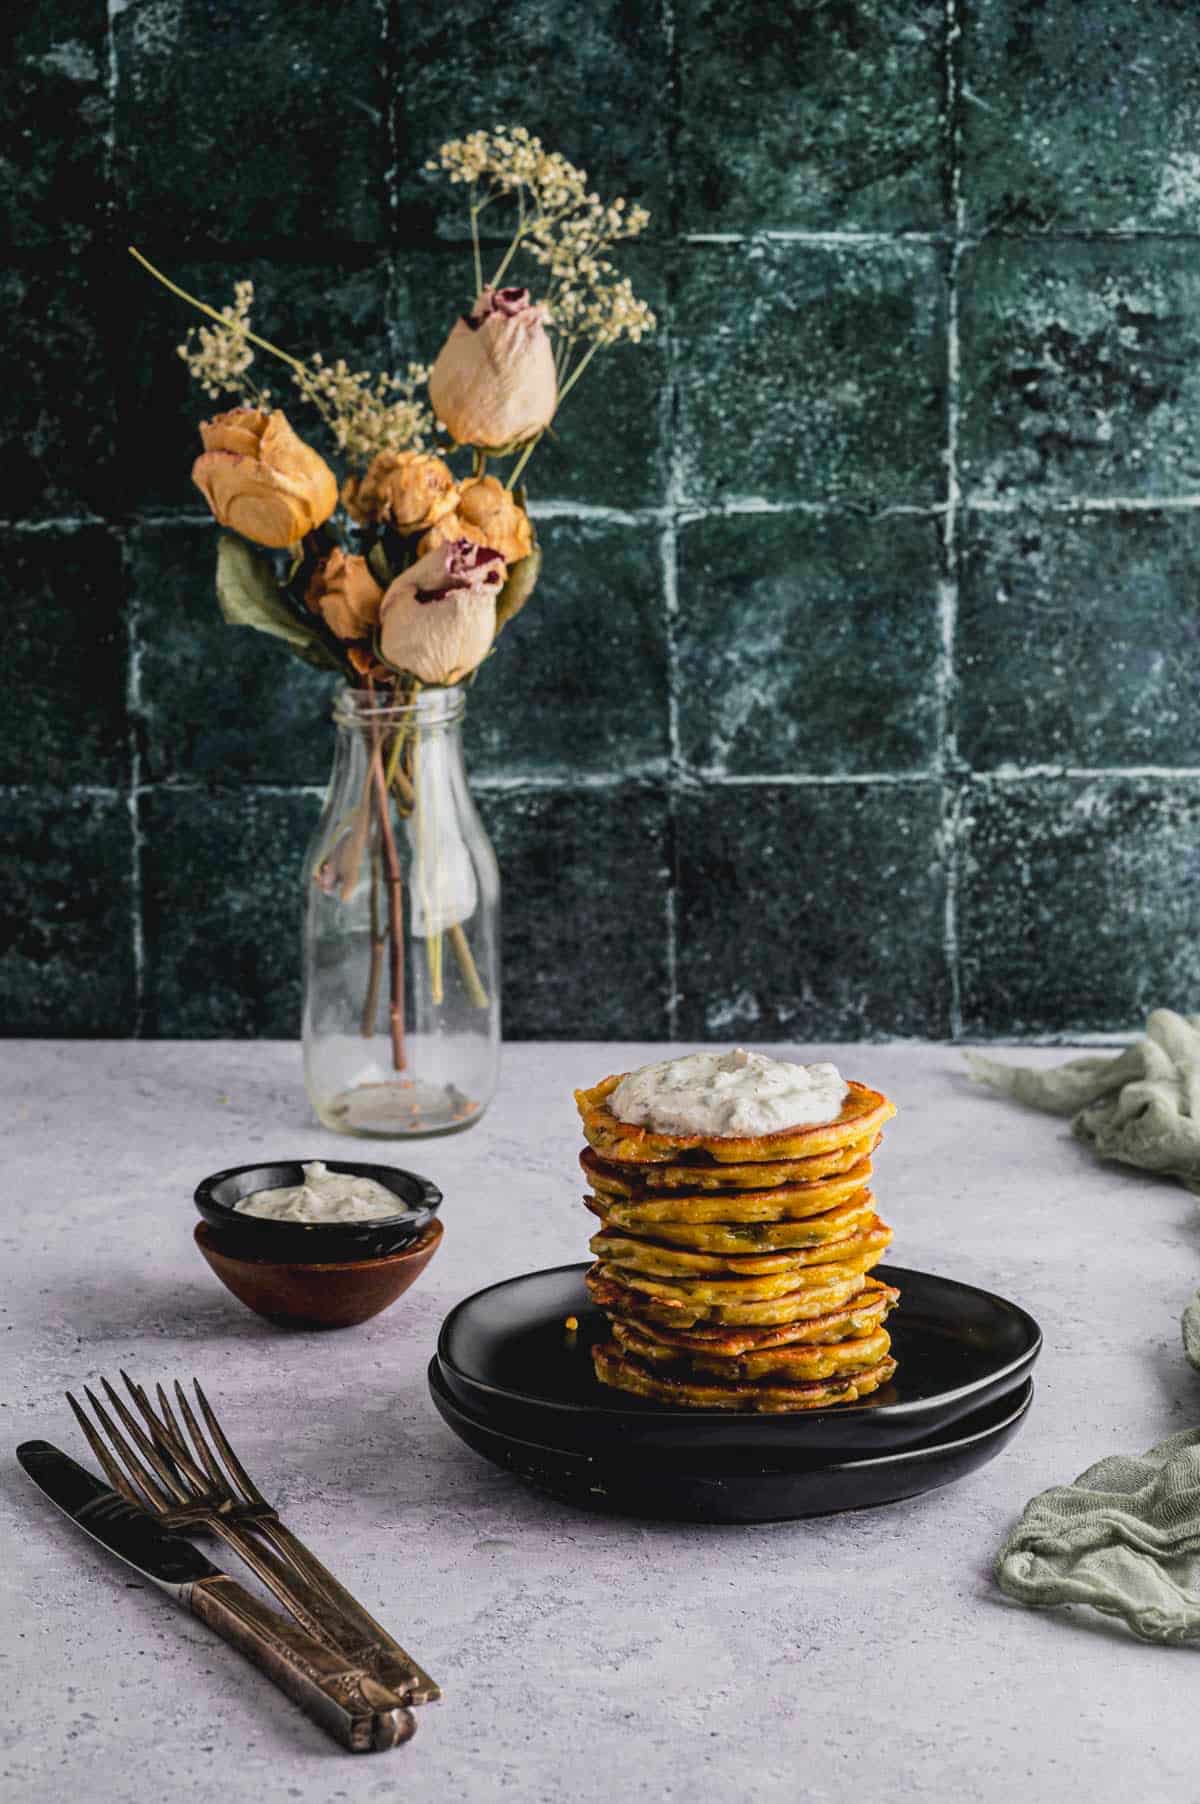 A stack of Savory Chickpea Flour and Scallion Pancakes plated on a small black plate. A small bowl of Greek Yogurt Caper Sauce and a vase of flowers sit in the background.